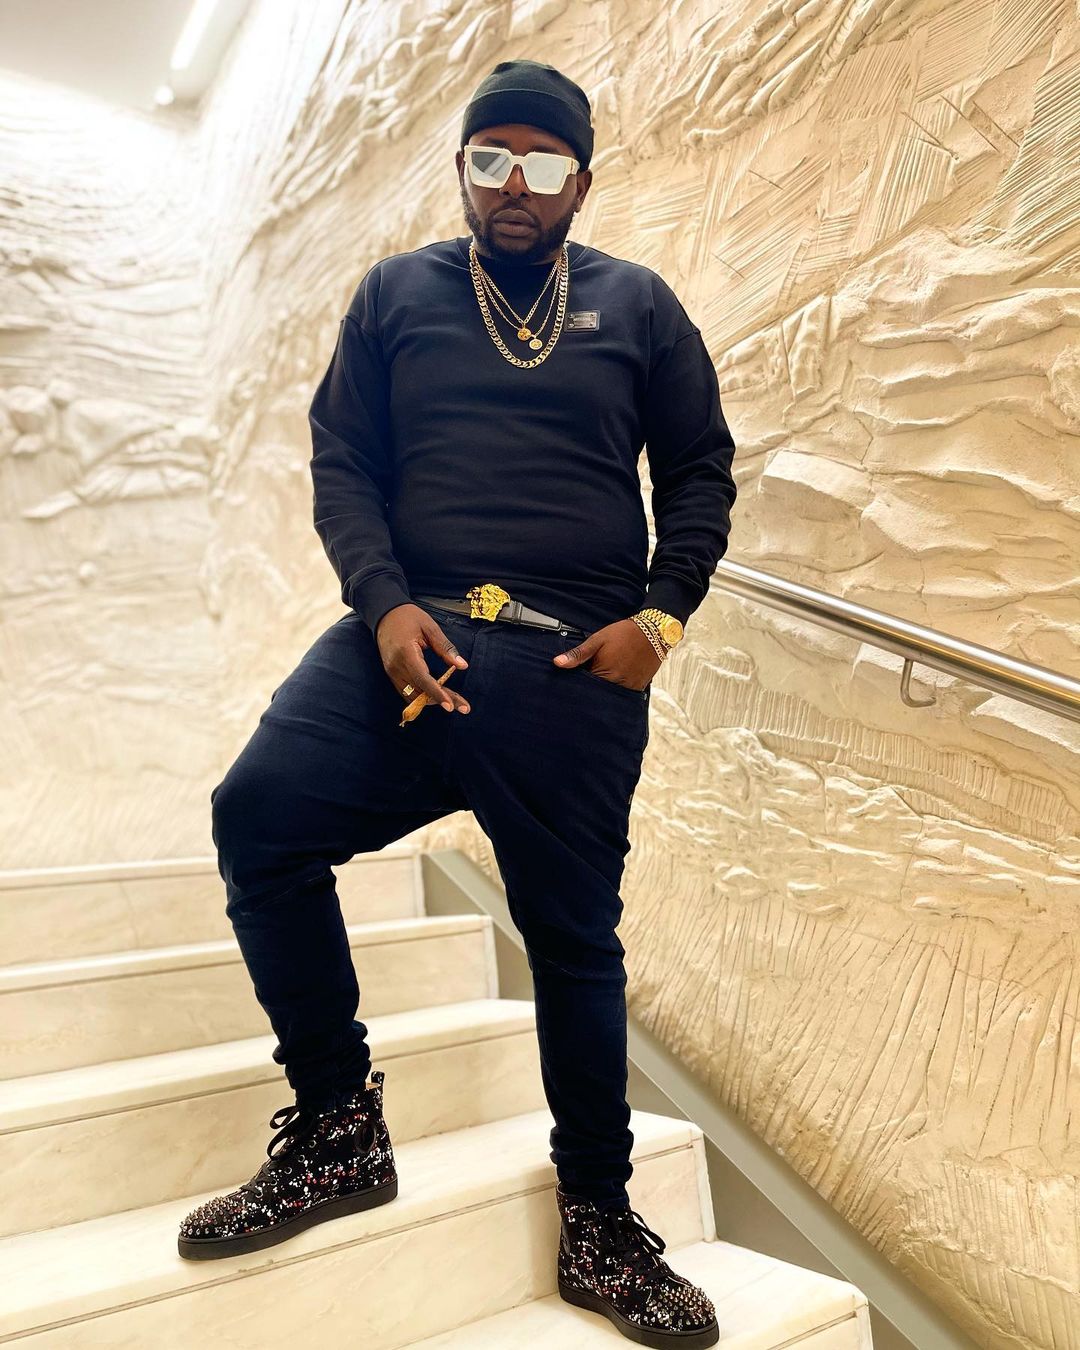 DJ Maphorisa – I deserve to be credited for changing the fashion game